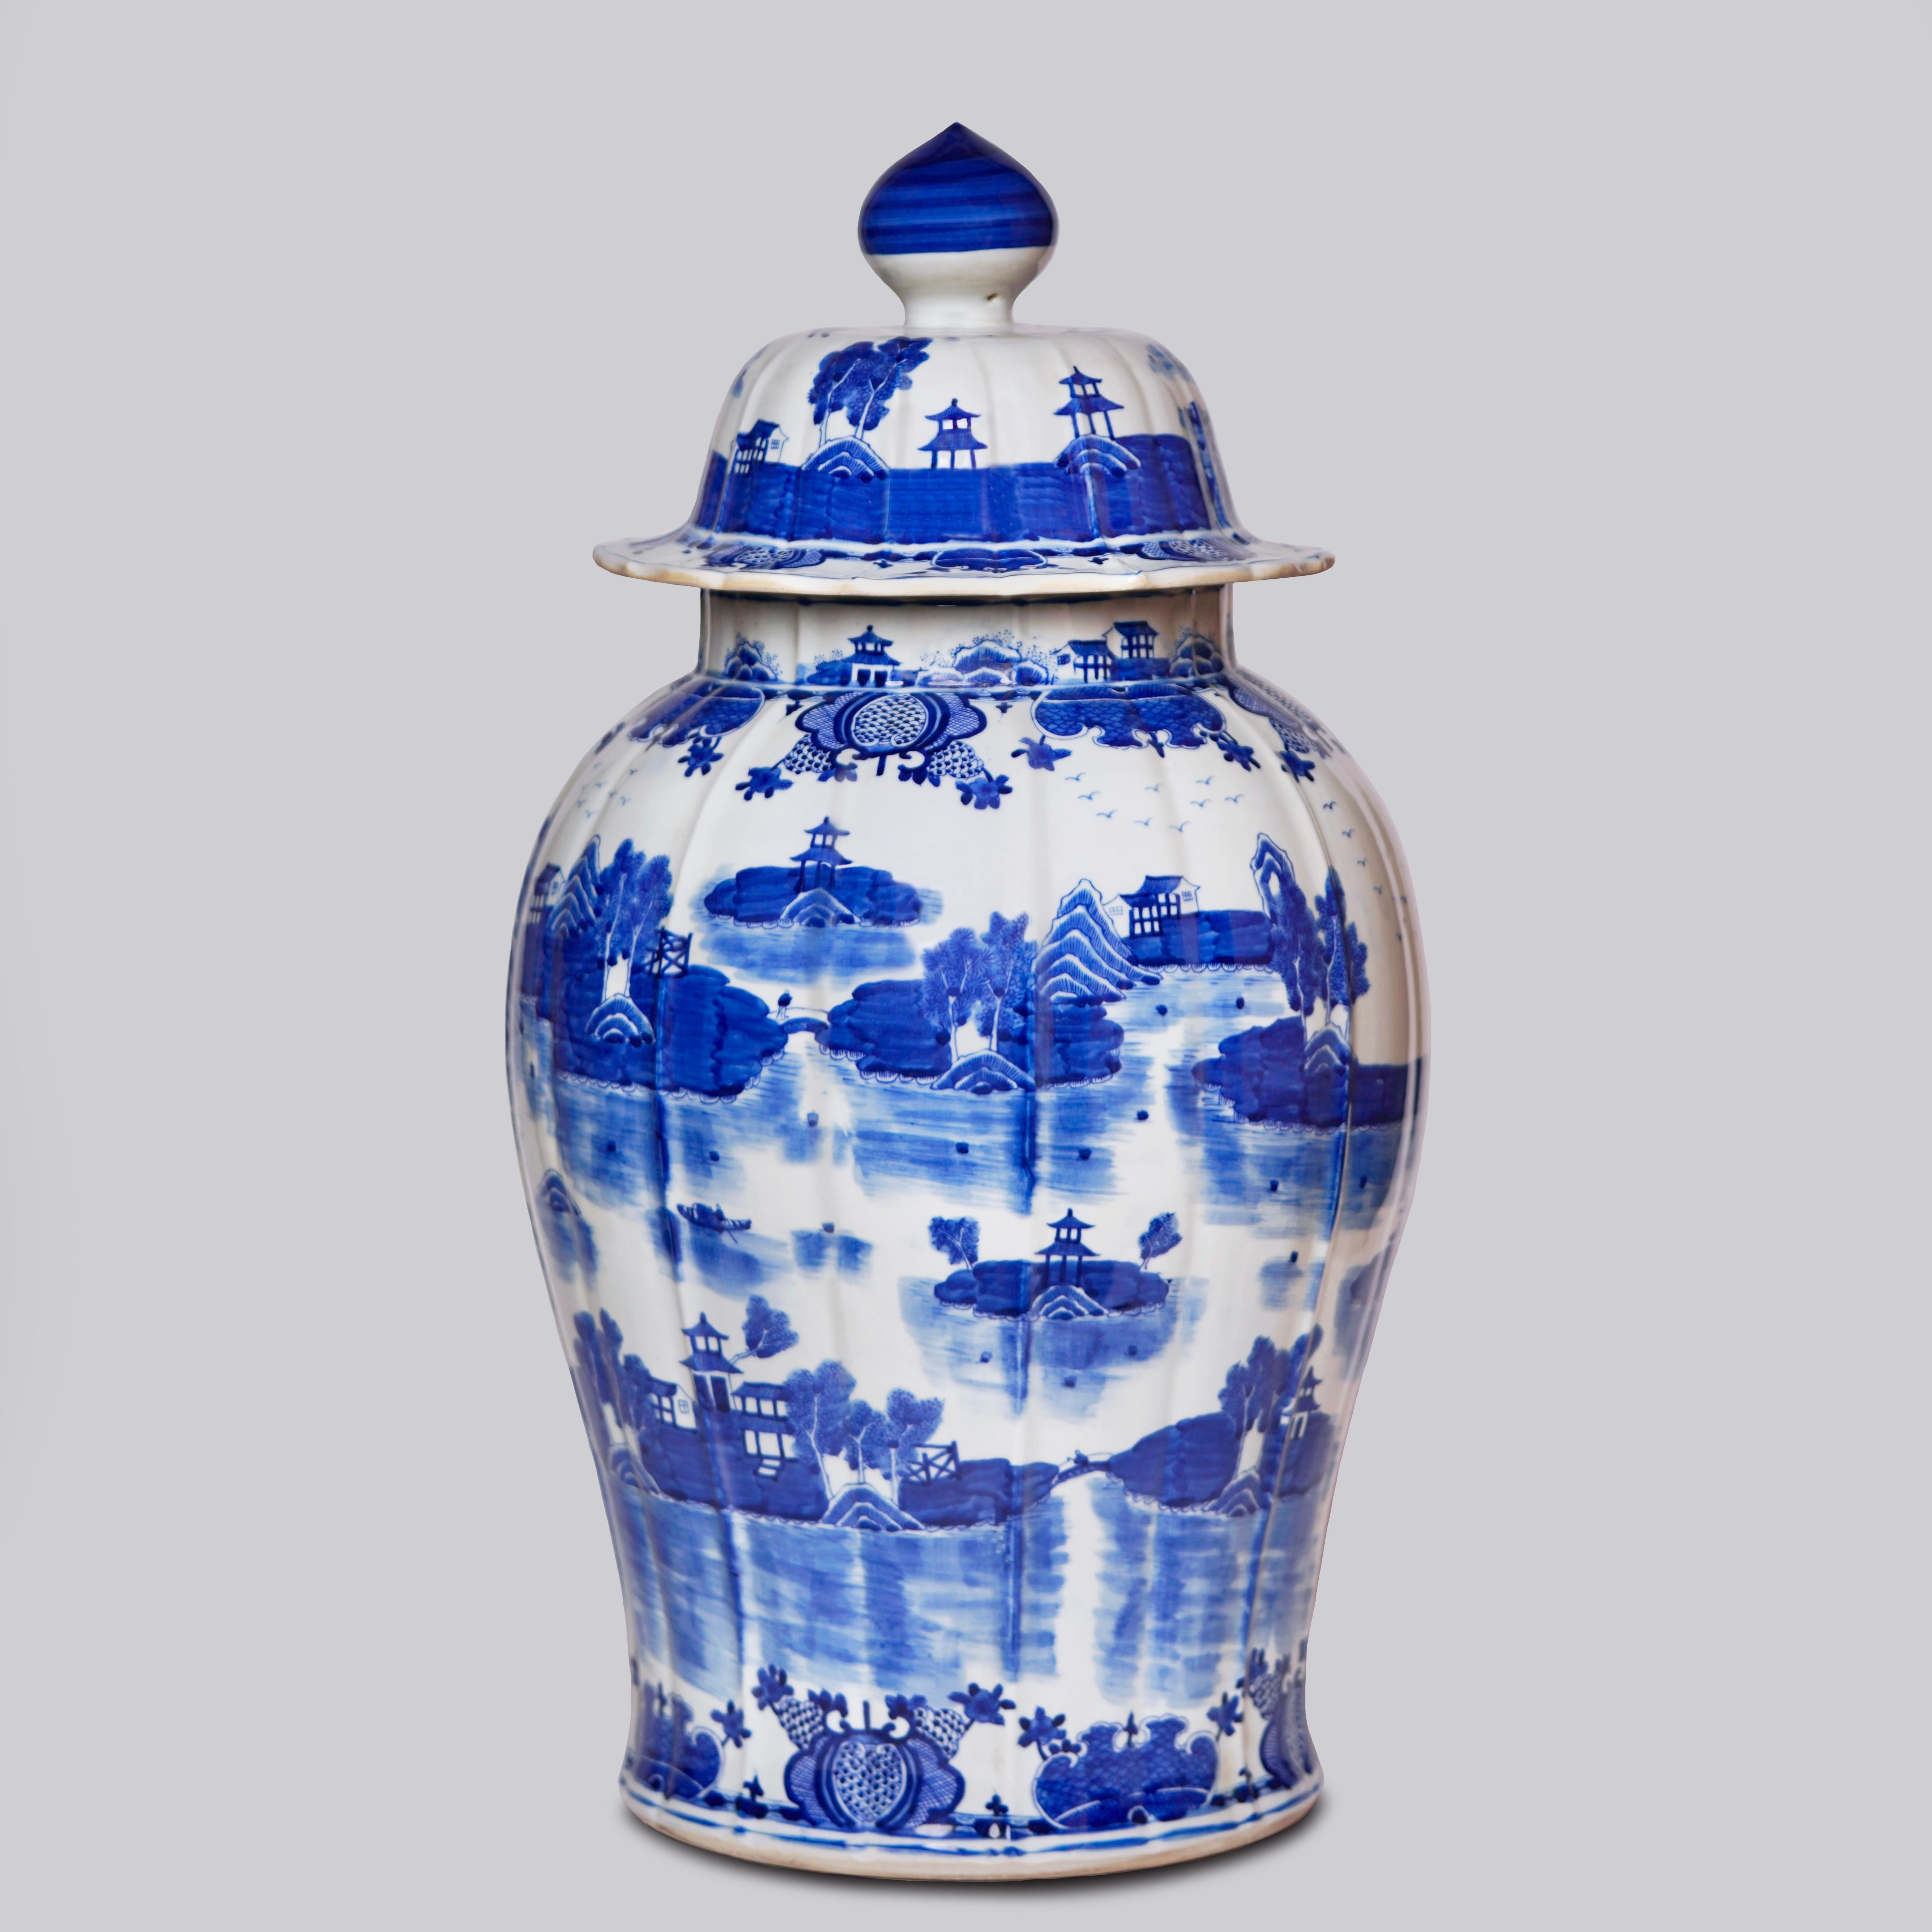 This temple jar is a traditional porcelain vessel from Jingdezhen, a town long distinguished by imperial patronage. The ribbed 